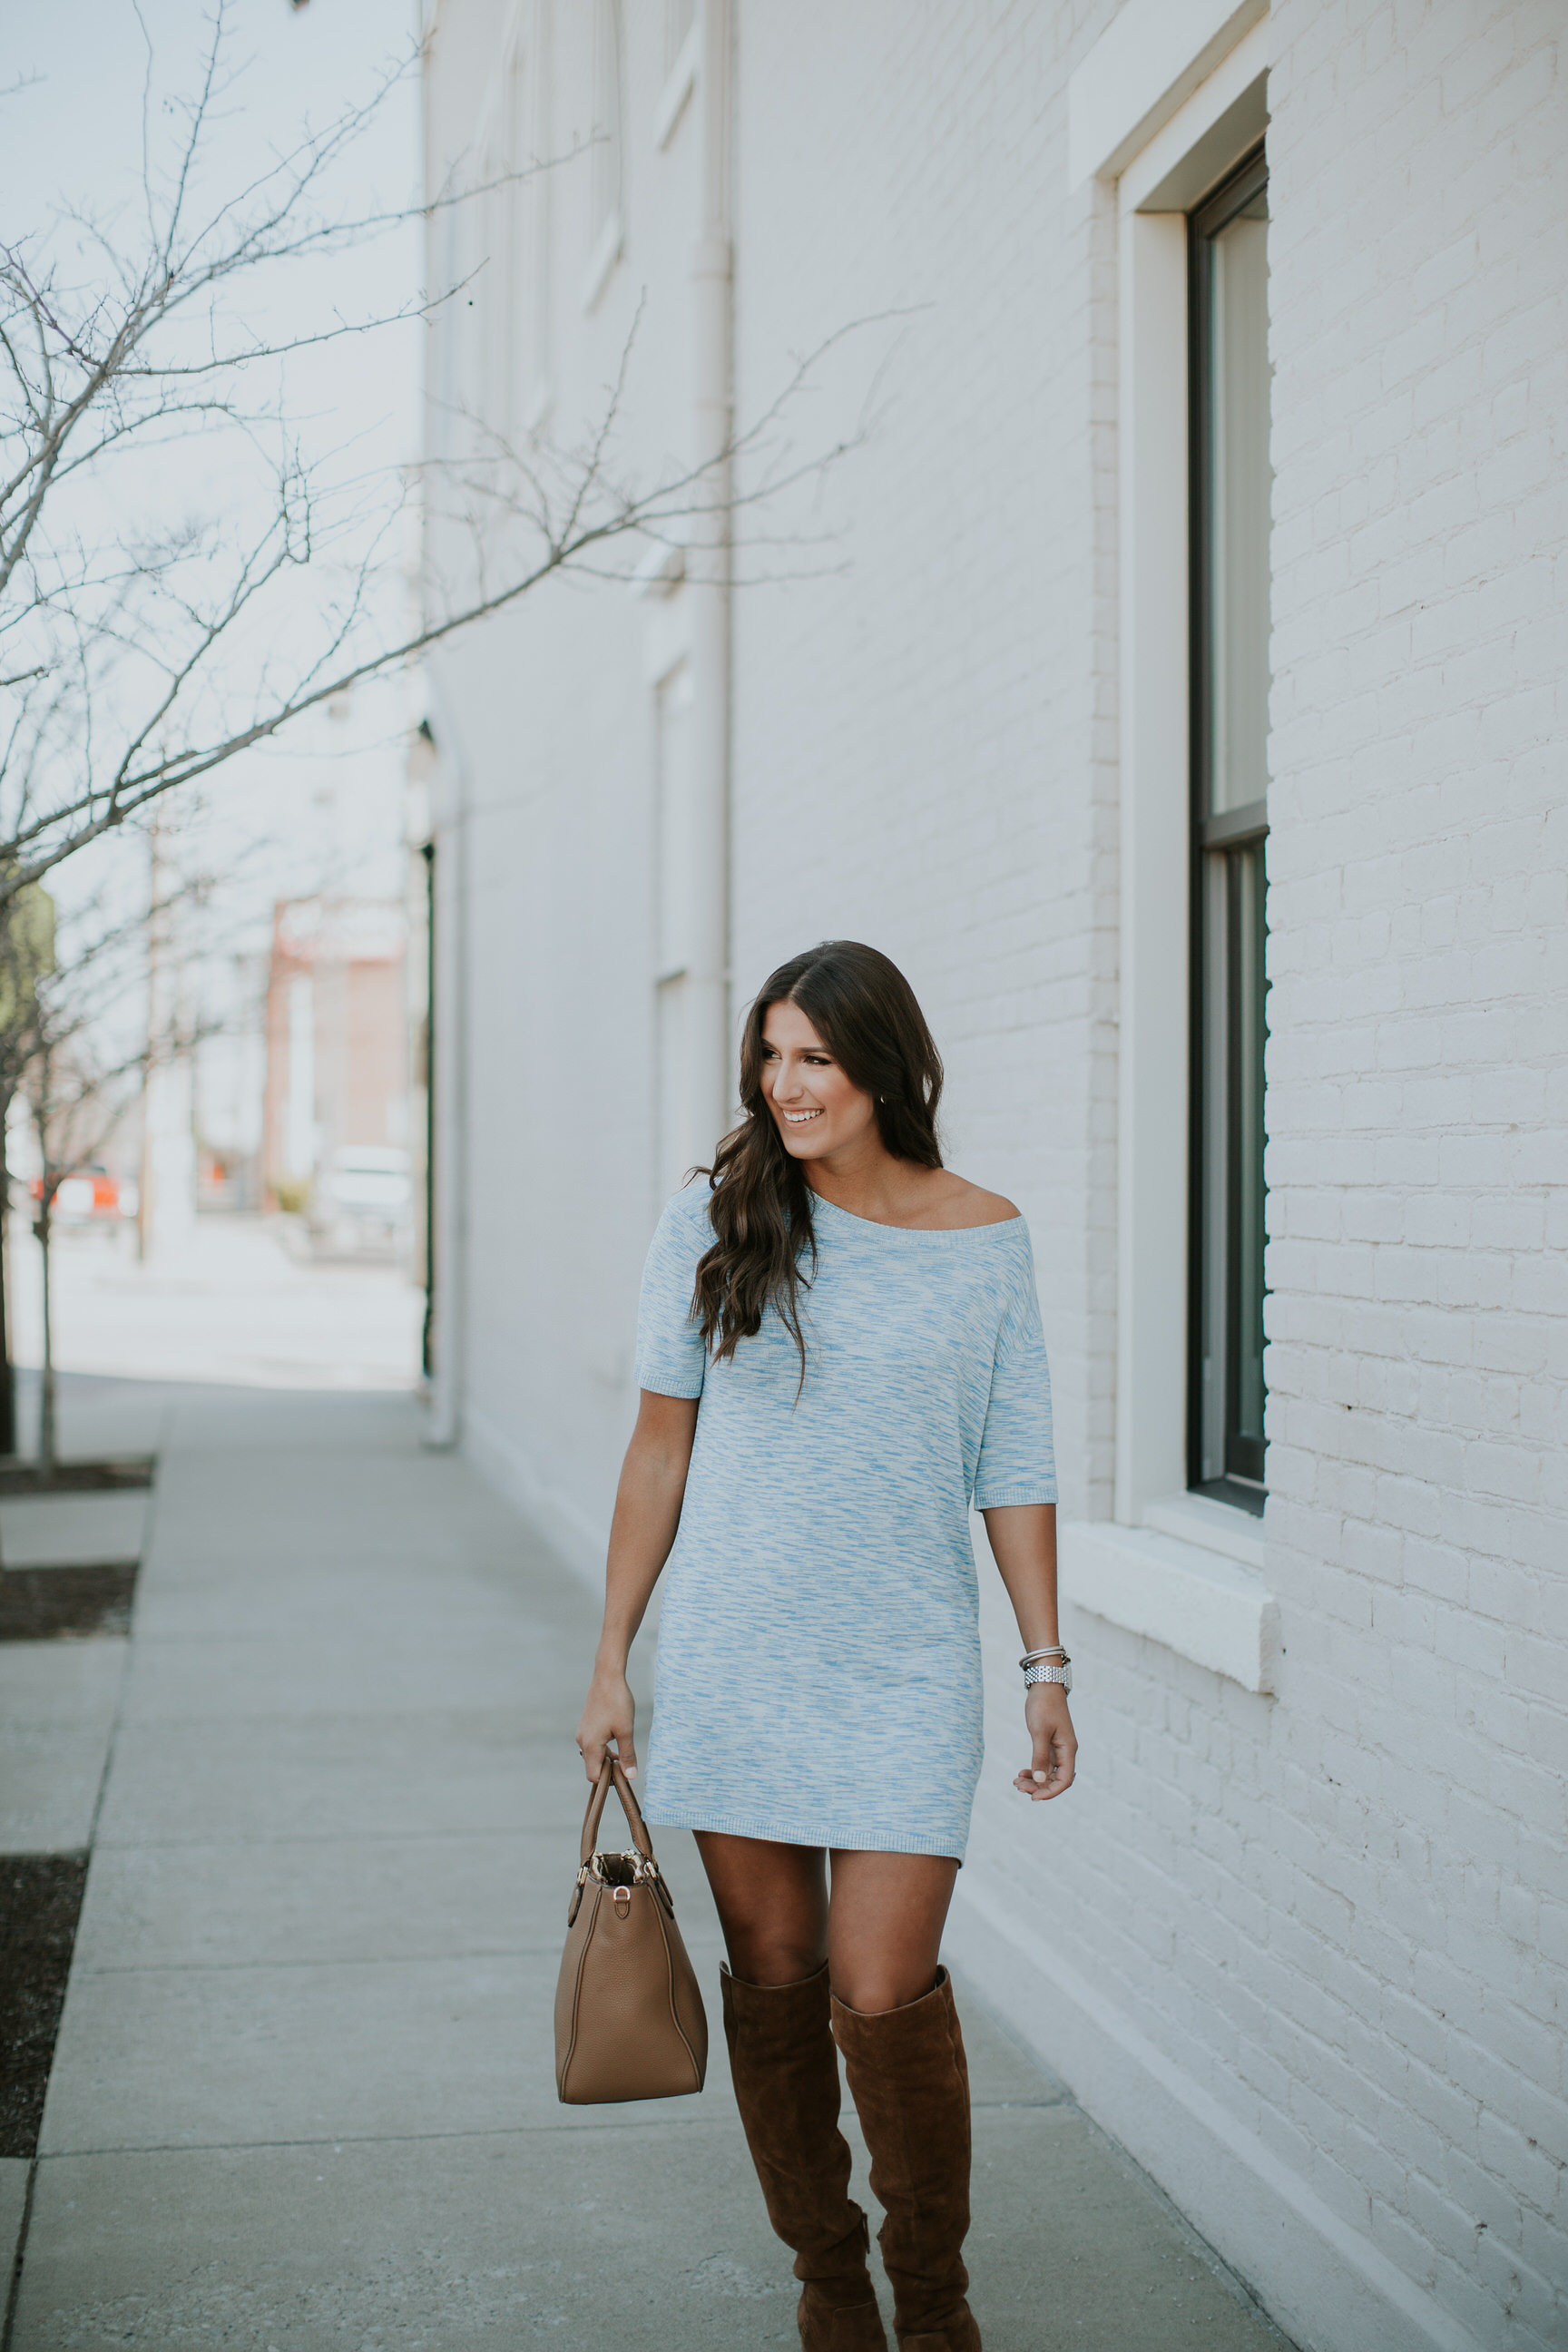 Bumpin' in this Winter White Sweater Dress – Skirt The Rules